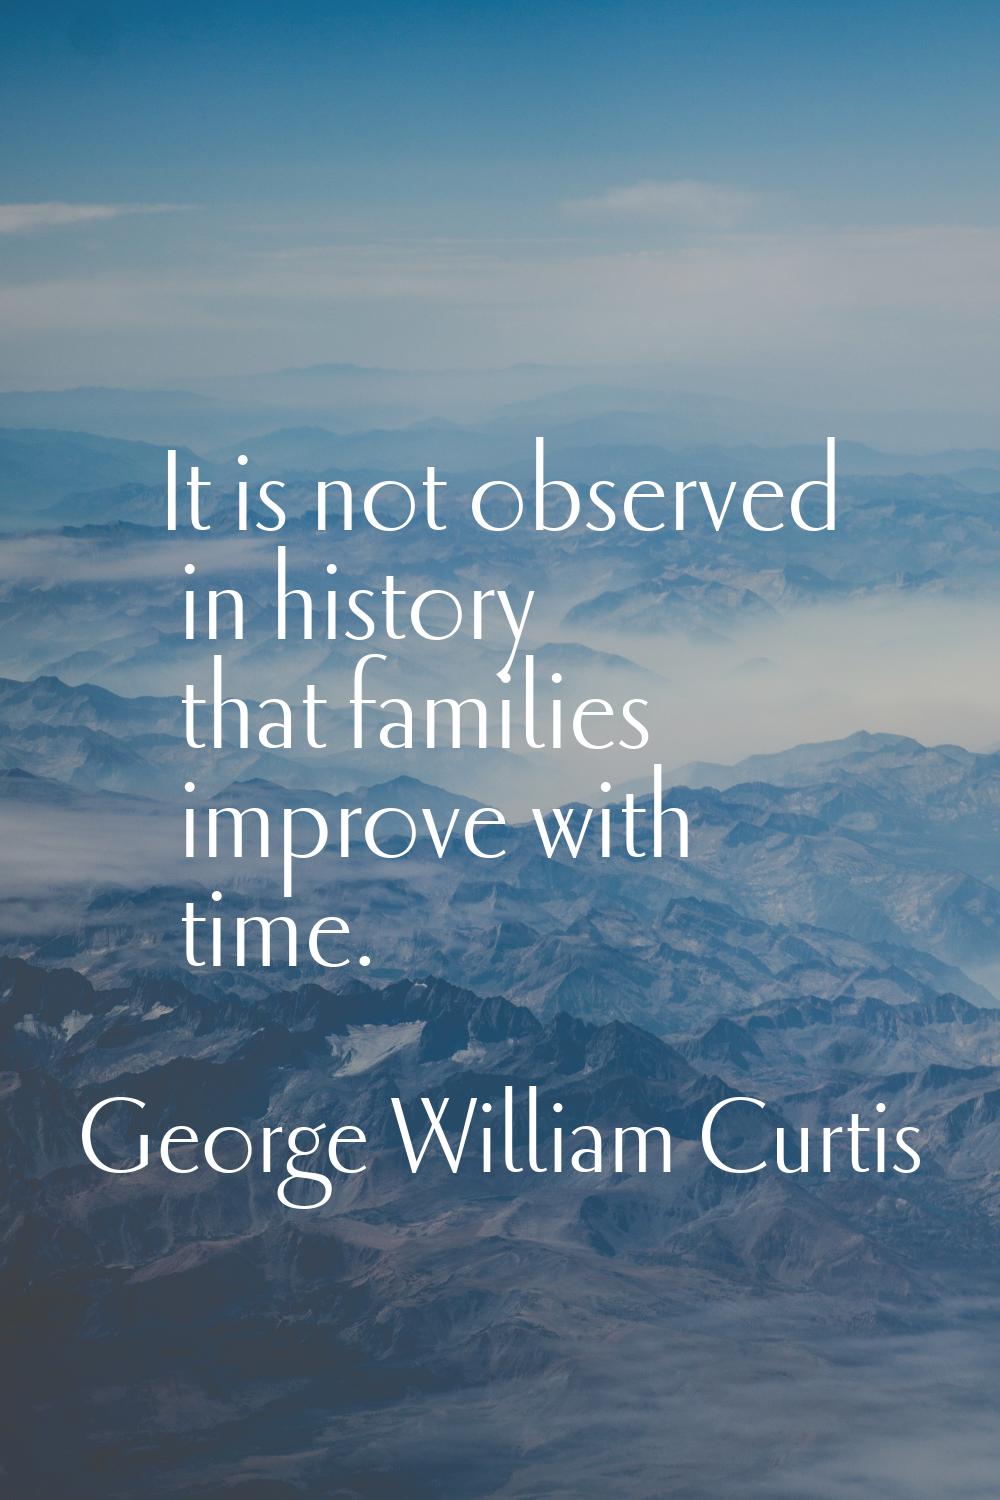 It is not observed in history that families improve with time.